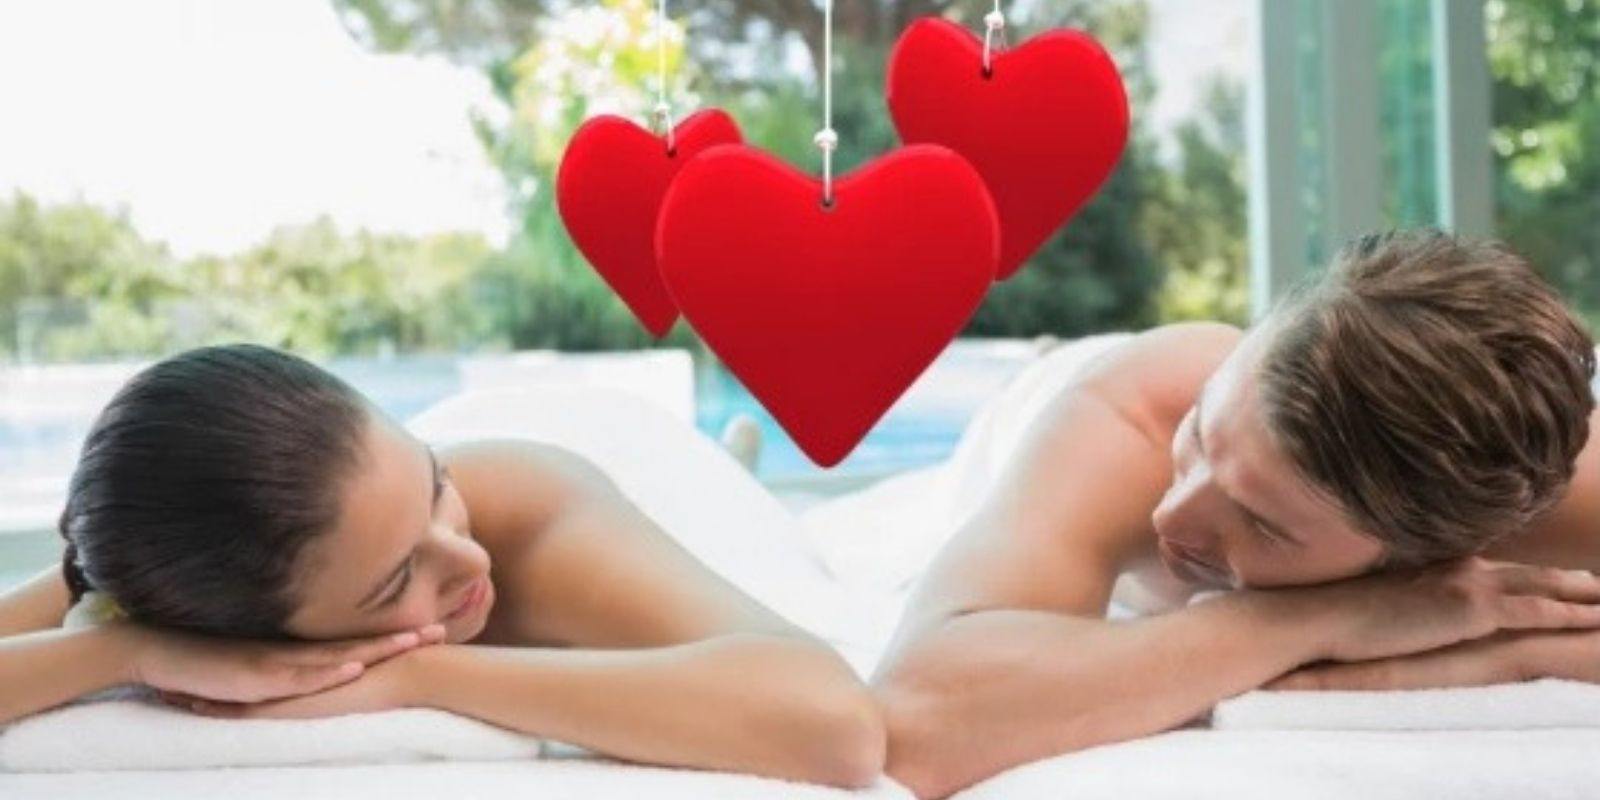 Enjoy intimate bliss with the best body massagers in India